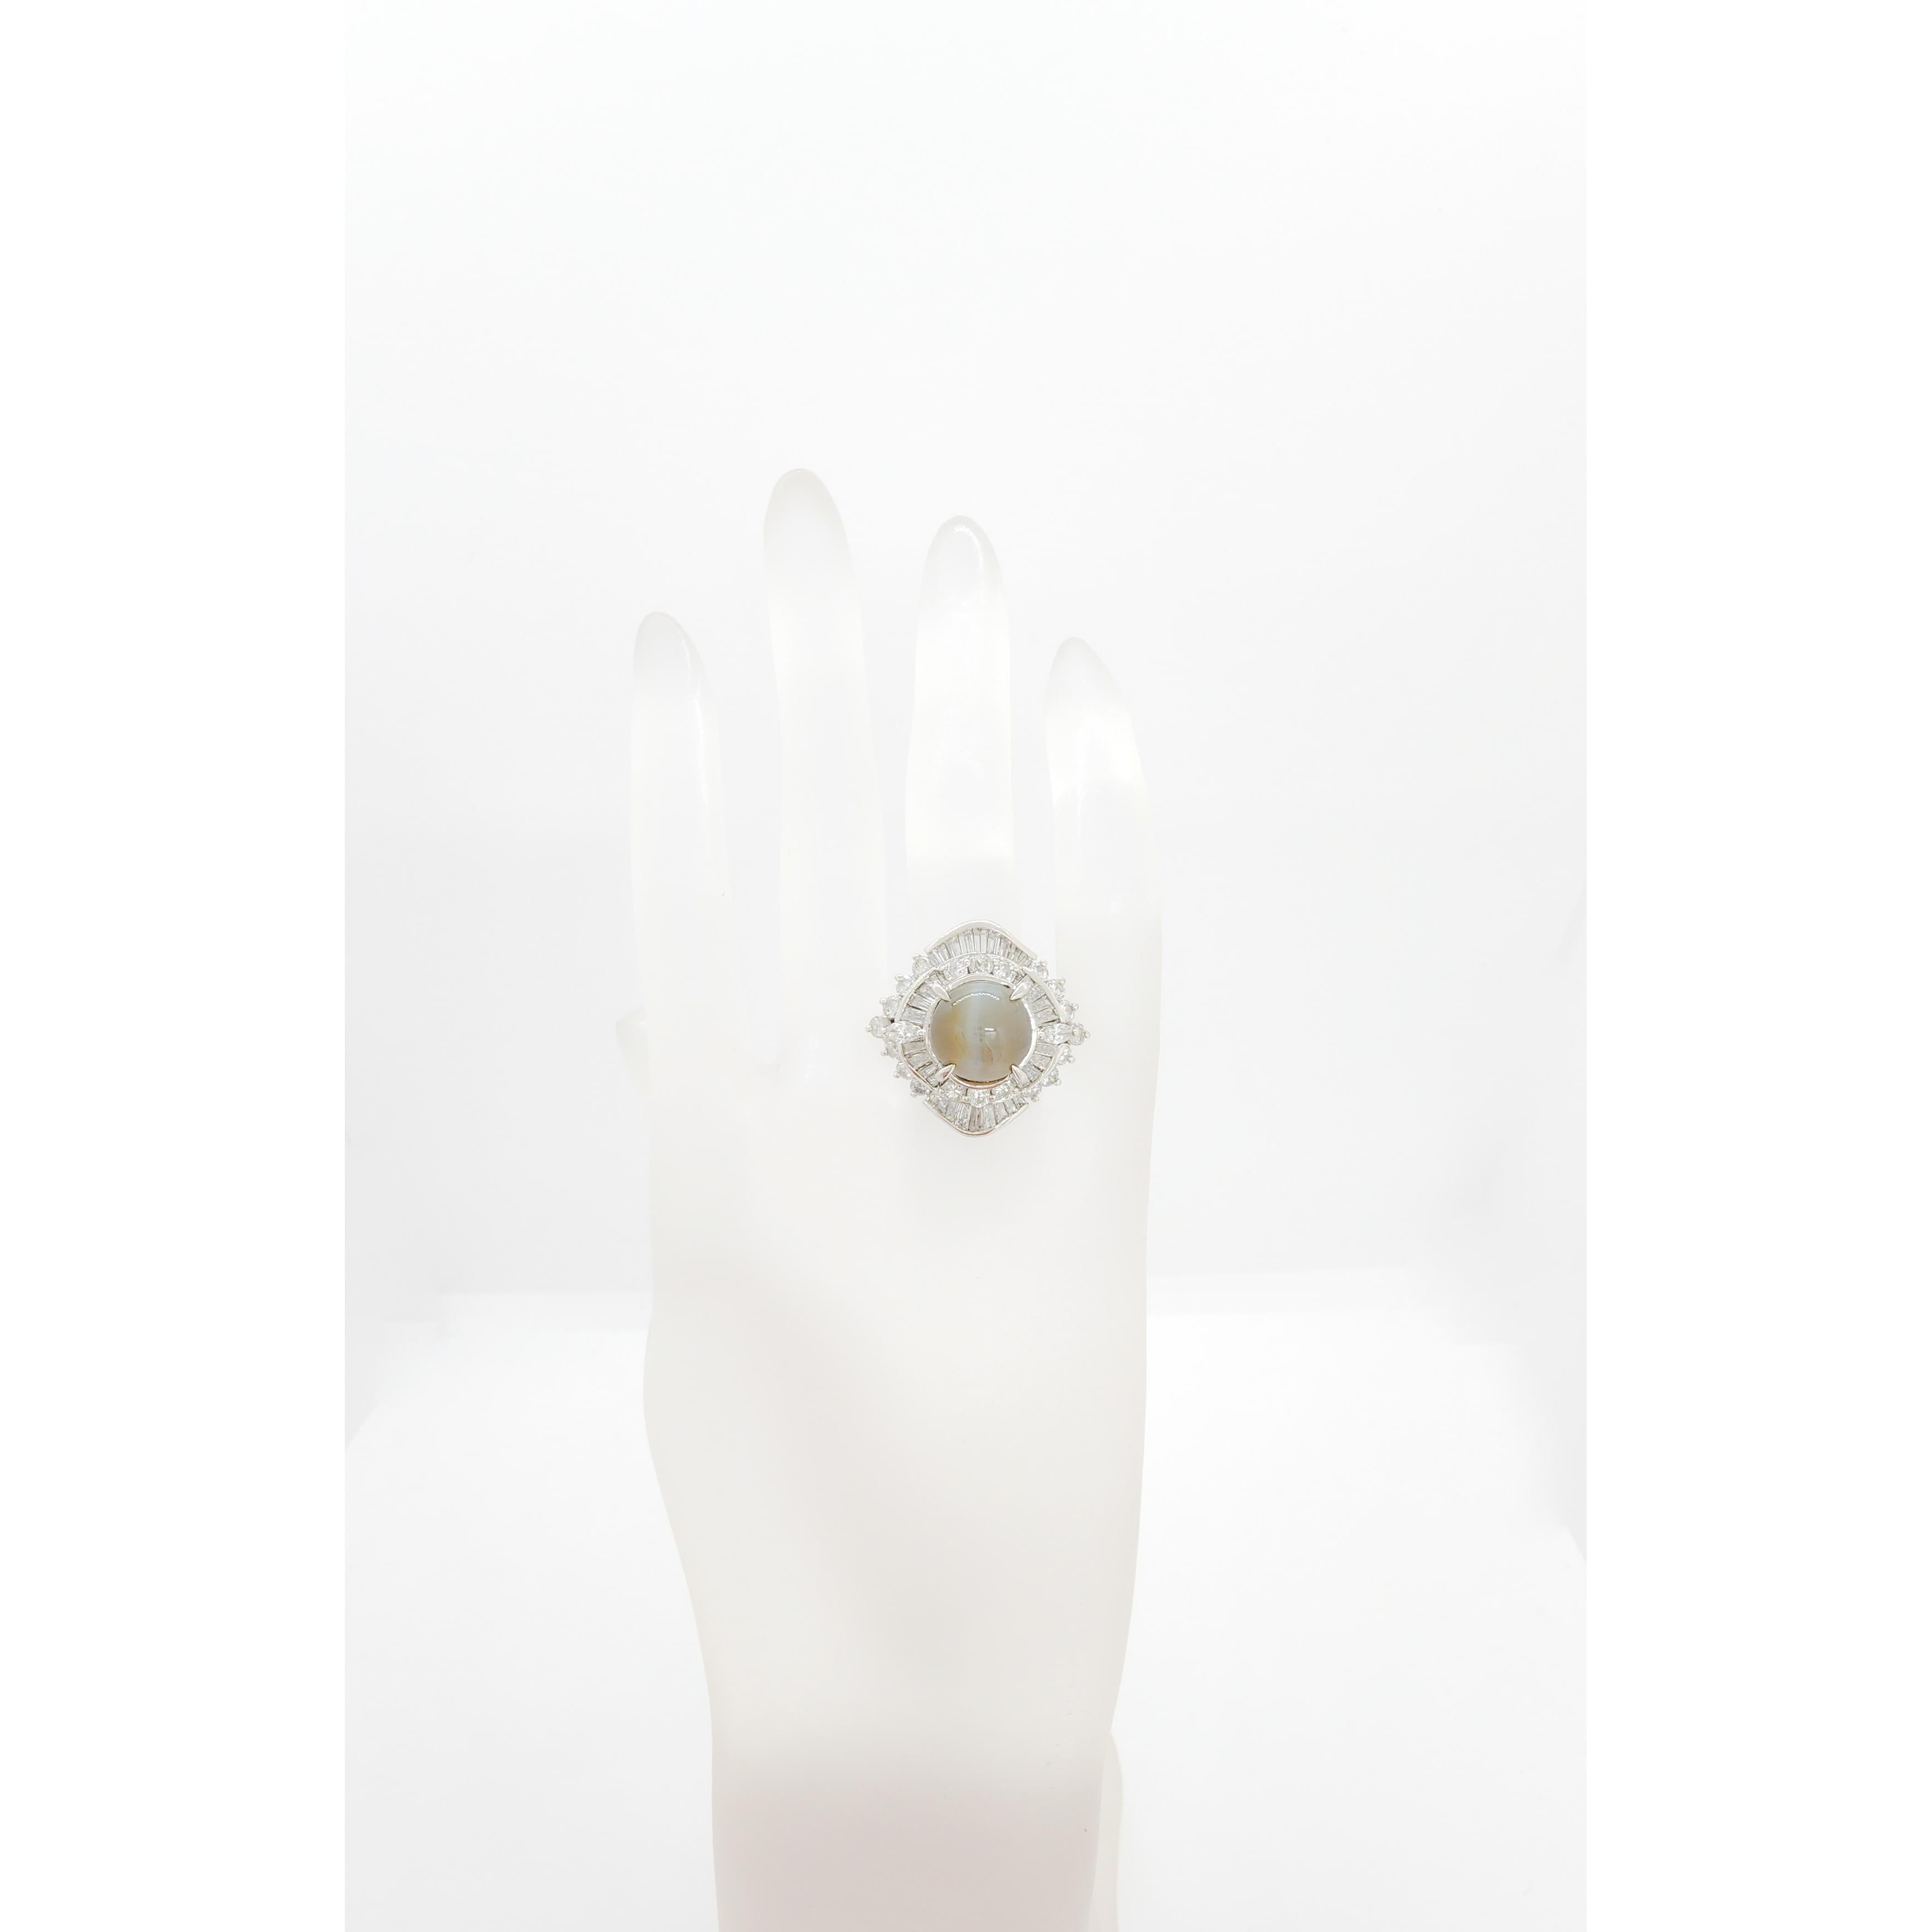 Cat's Eye Chrysoberyl Cabochon Round and White Diamond Cocktail Ring 2